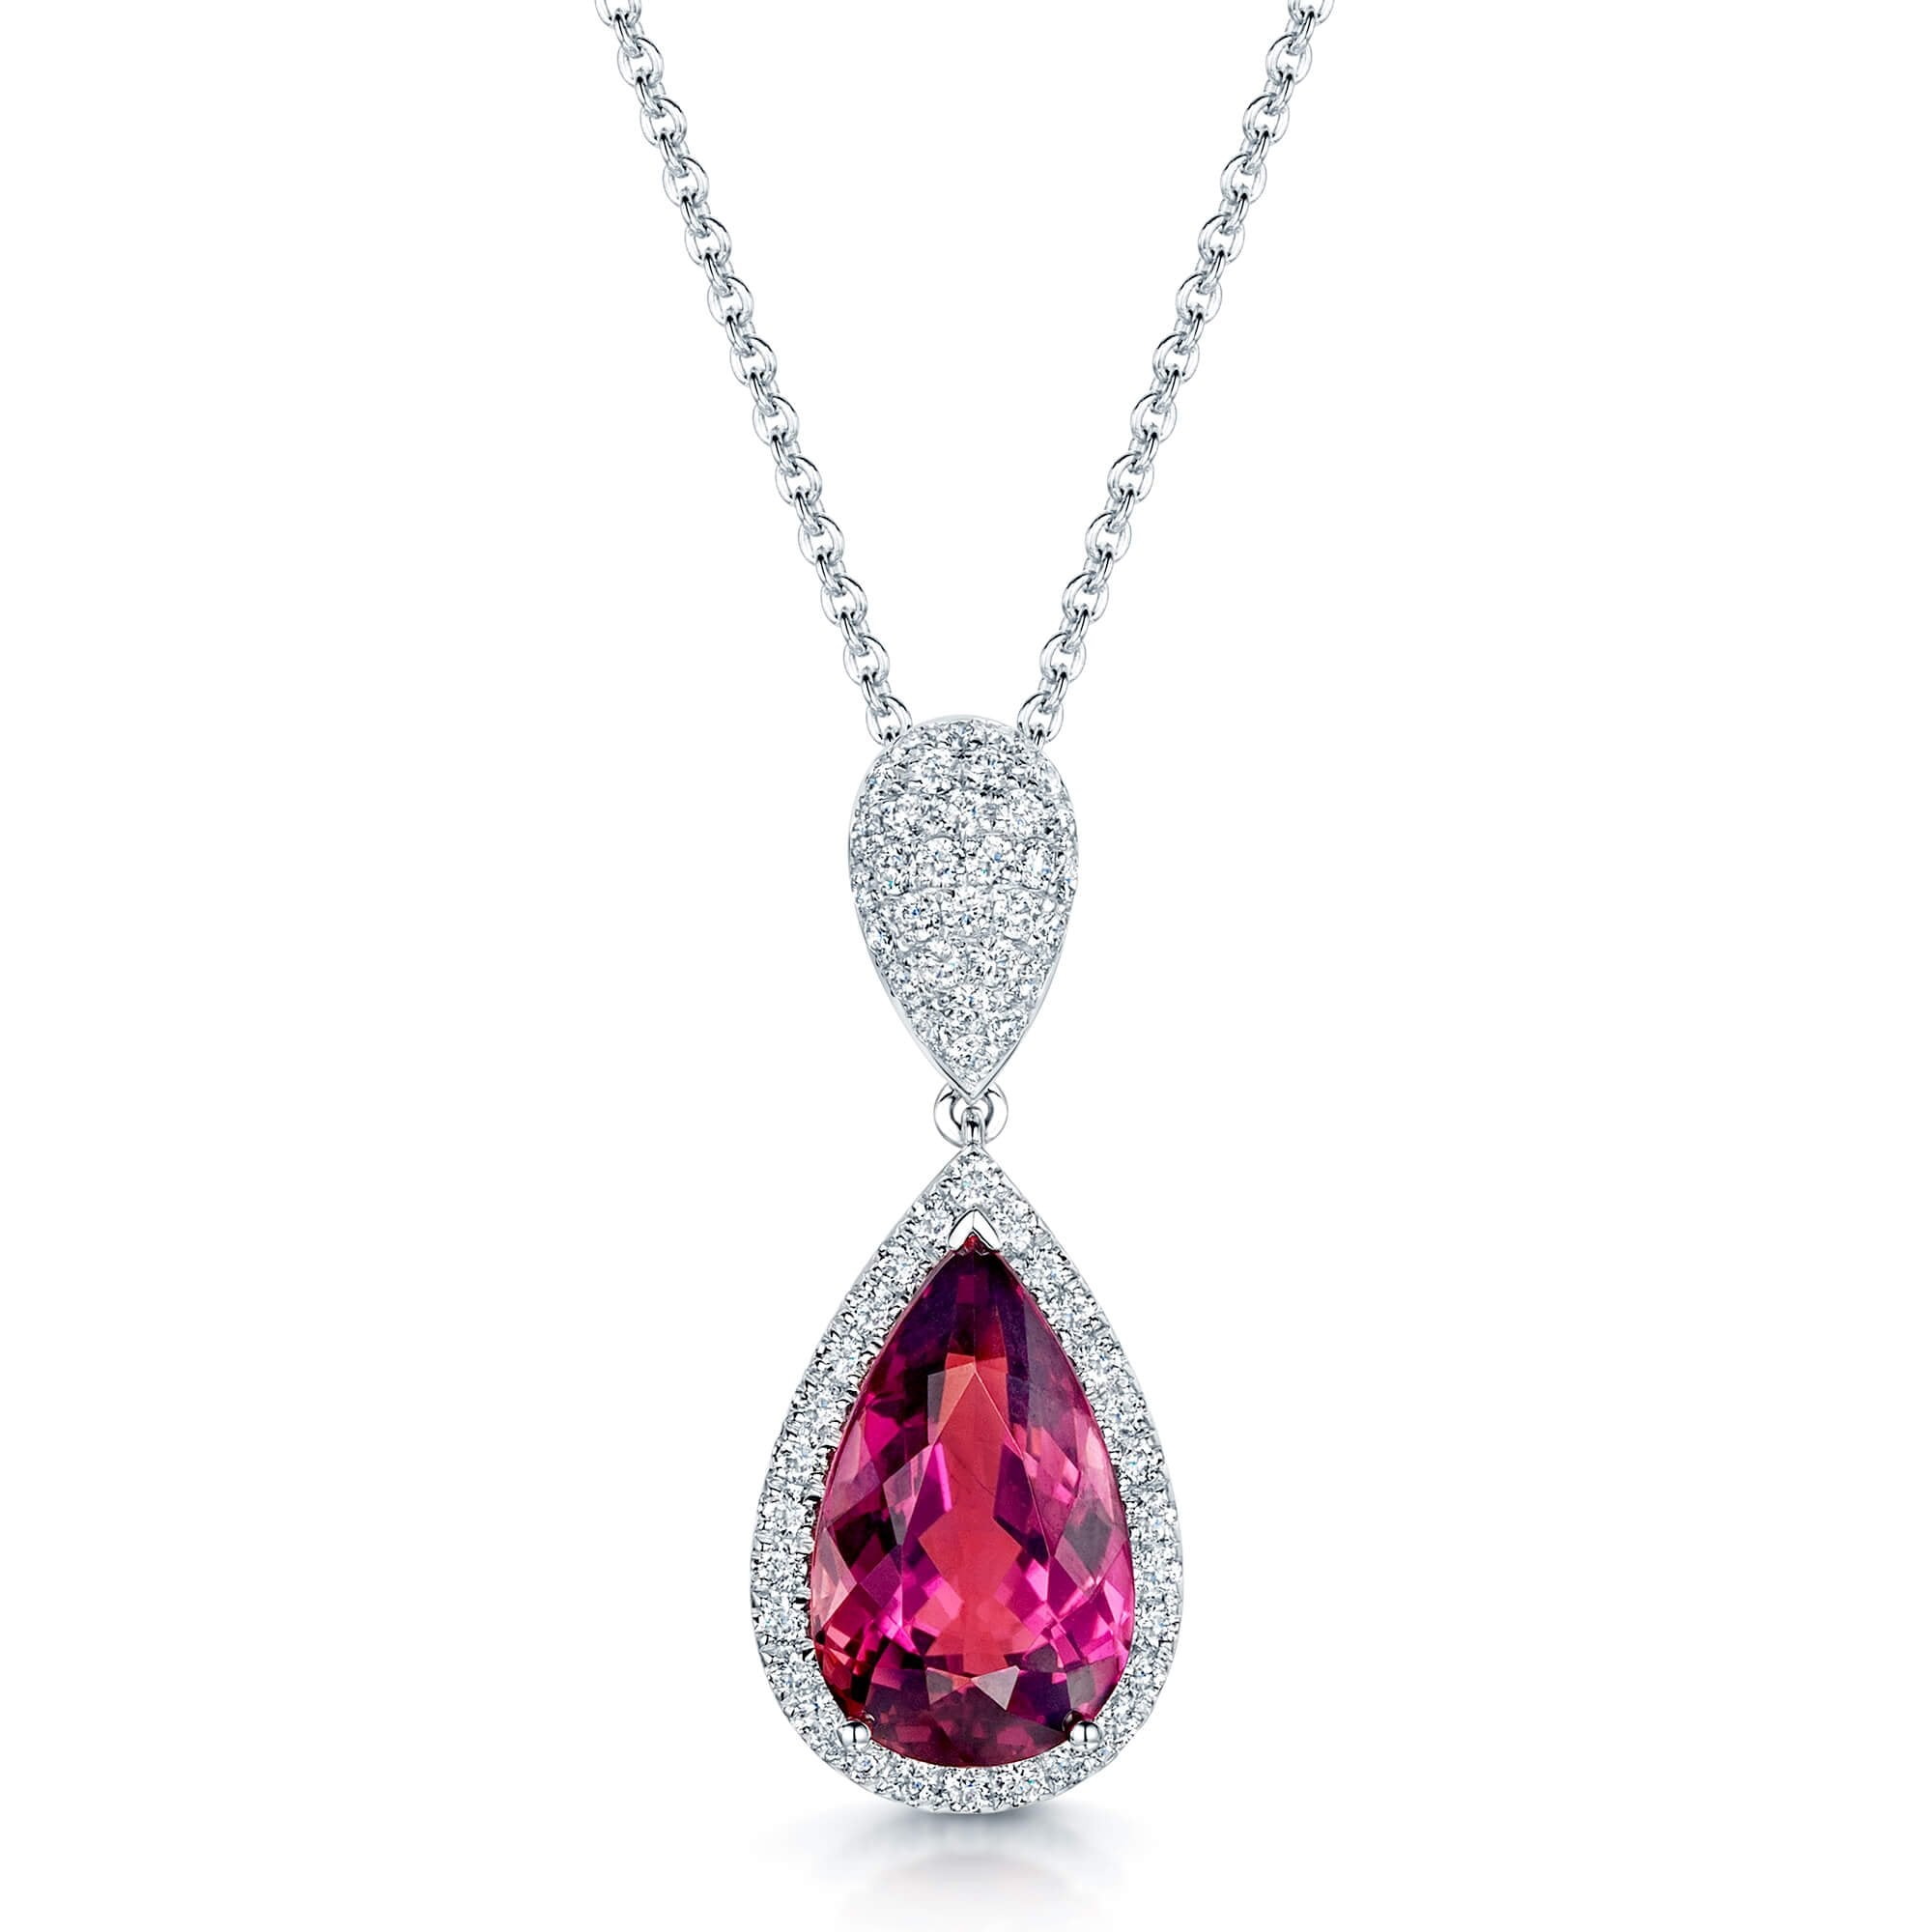 18ct White Gold Pear Shaped Rubellite and Diamond Halo Pendant with Fancy Bale